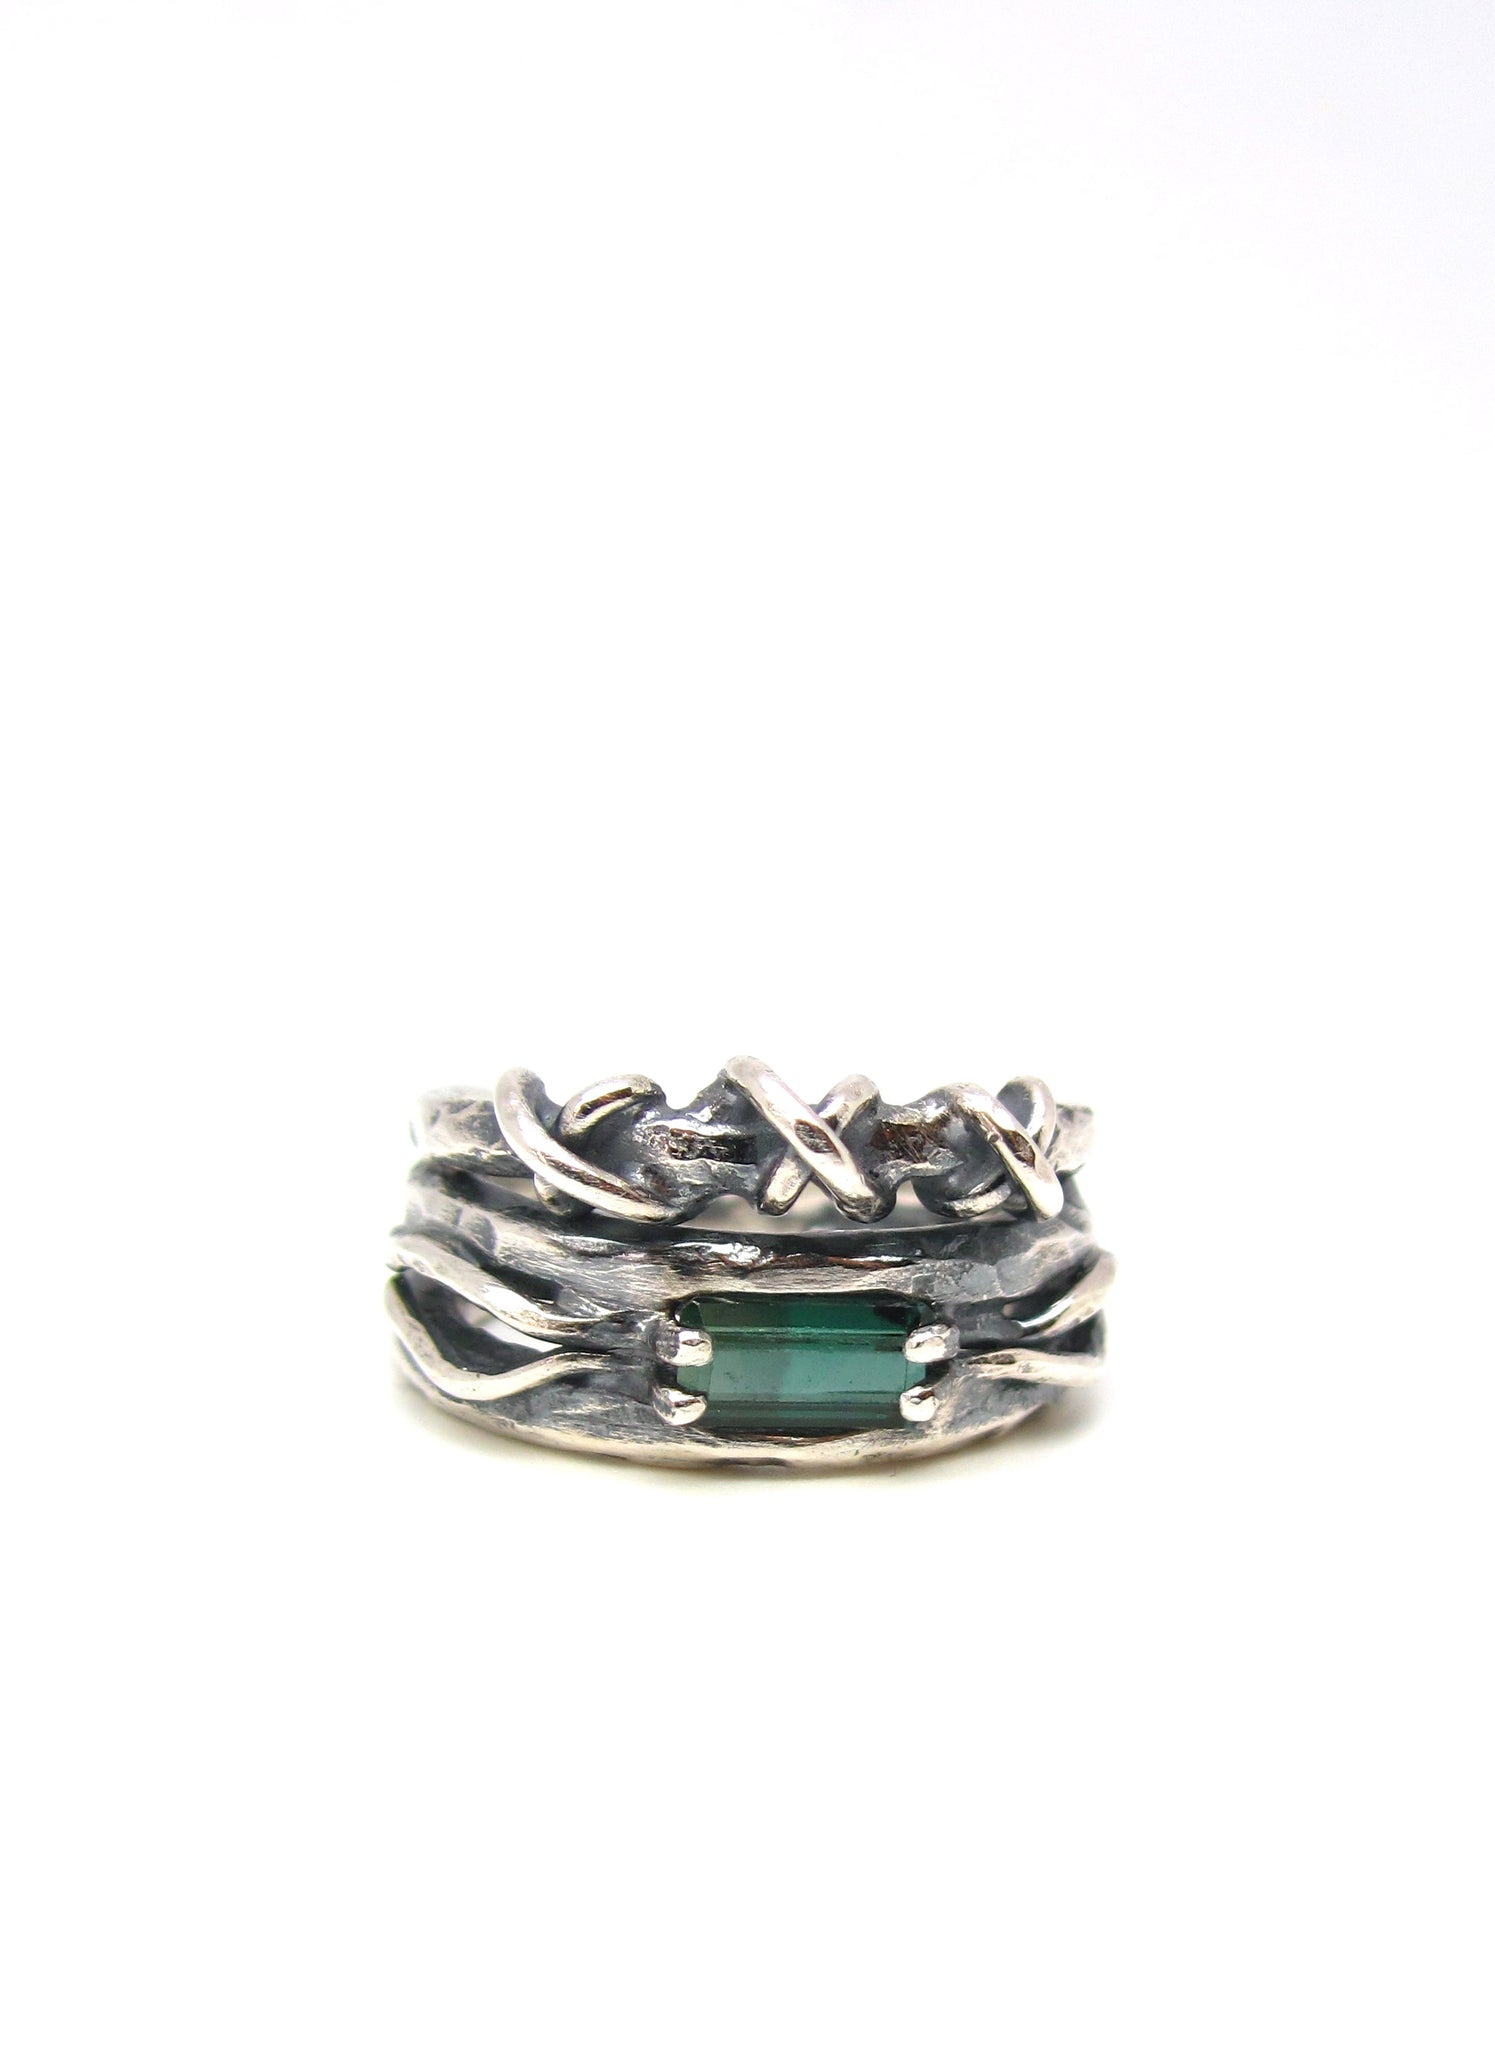 The Embedded Tourmaline and Barbed Wire Ring